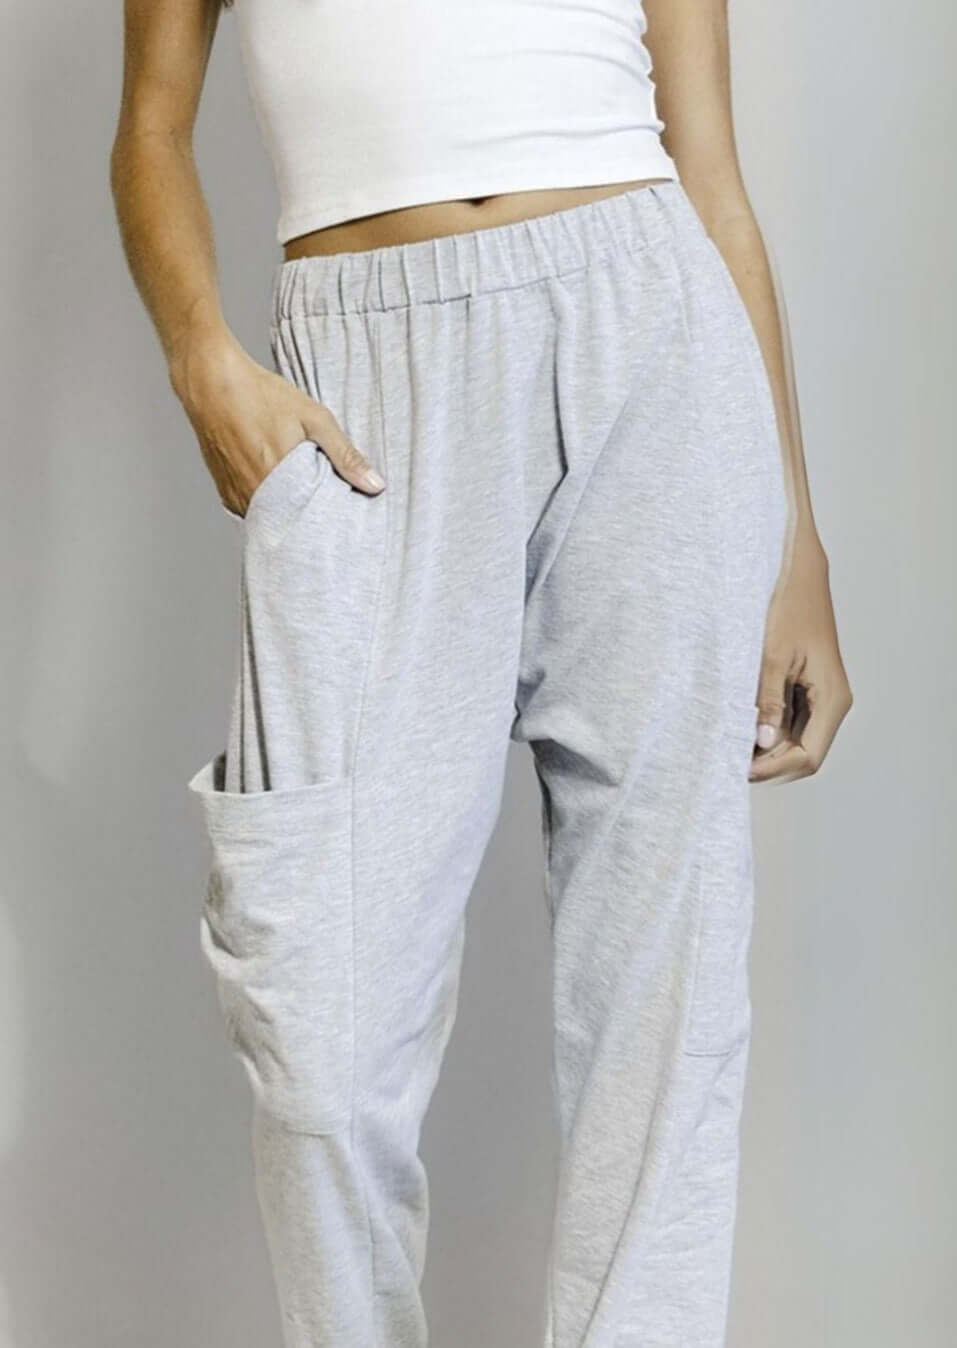 Bucket List Clothing Style# P5349 | Grey Relaxed Fit Fashion Cargo Joggers with Patch Pockets | Made in USA | Classy Cozy Cool Women's Made in America Clothing Boutique